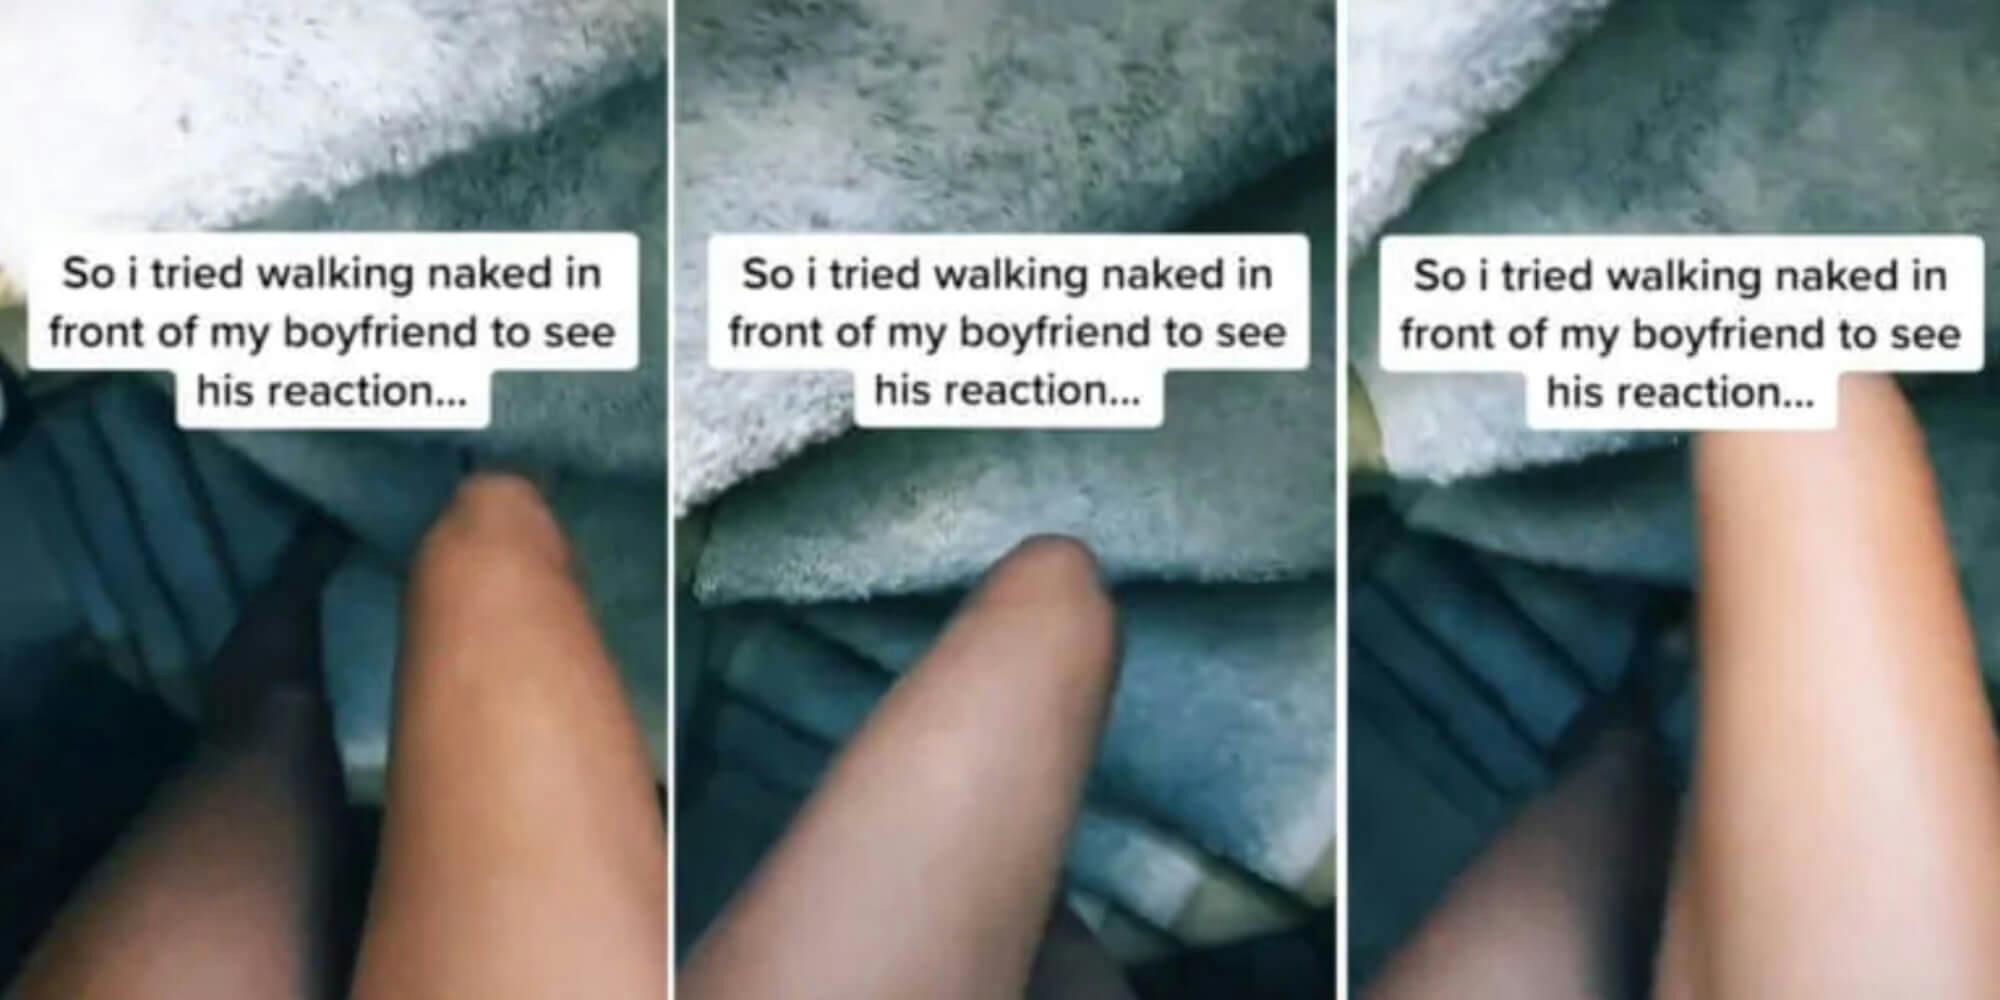 Three screenshots show the legs of a young white woman, walking in front of her boyfriend while apparently naked. She is participating in the "walk in naked" challenge.